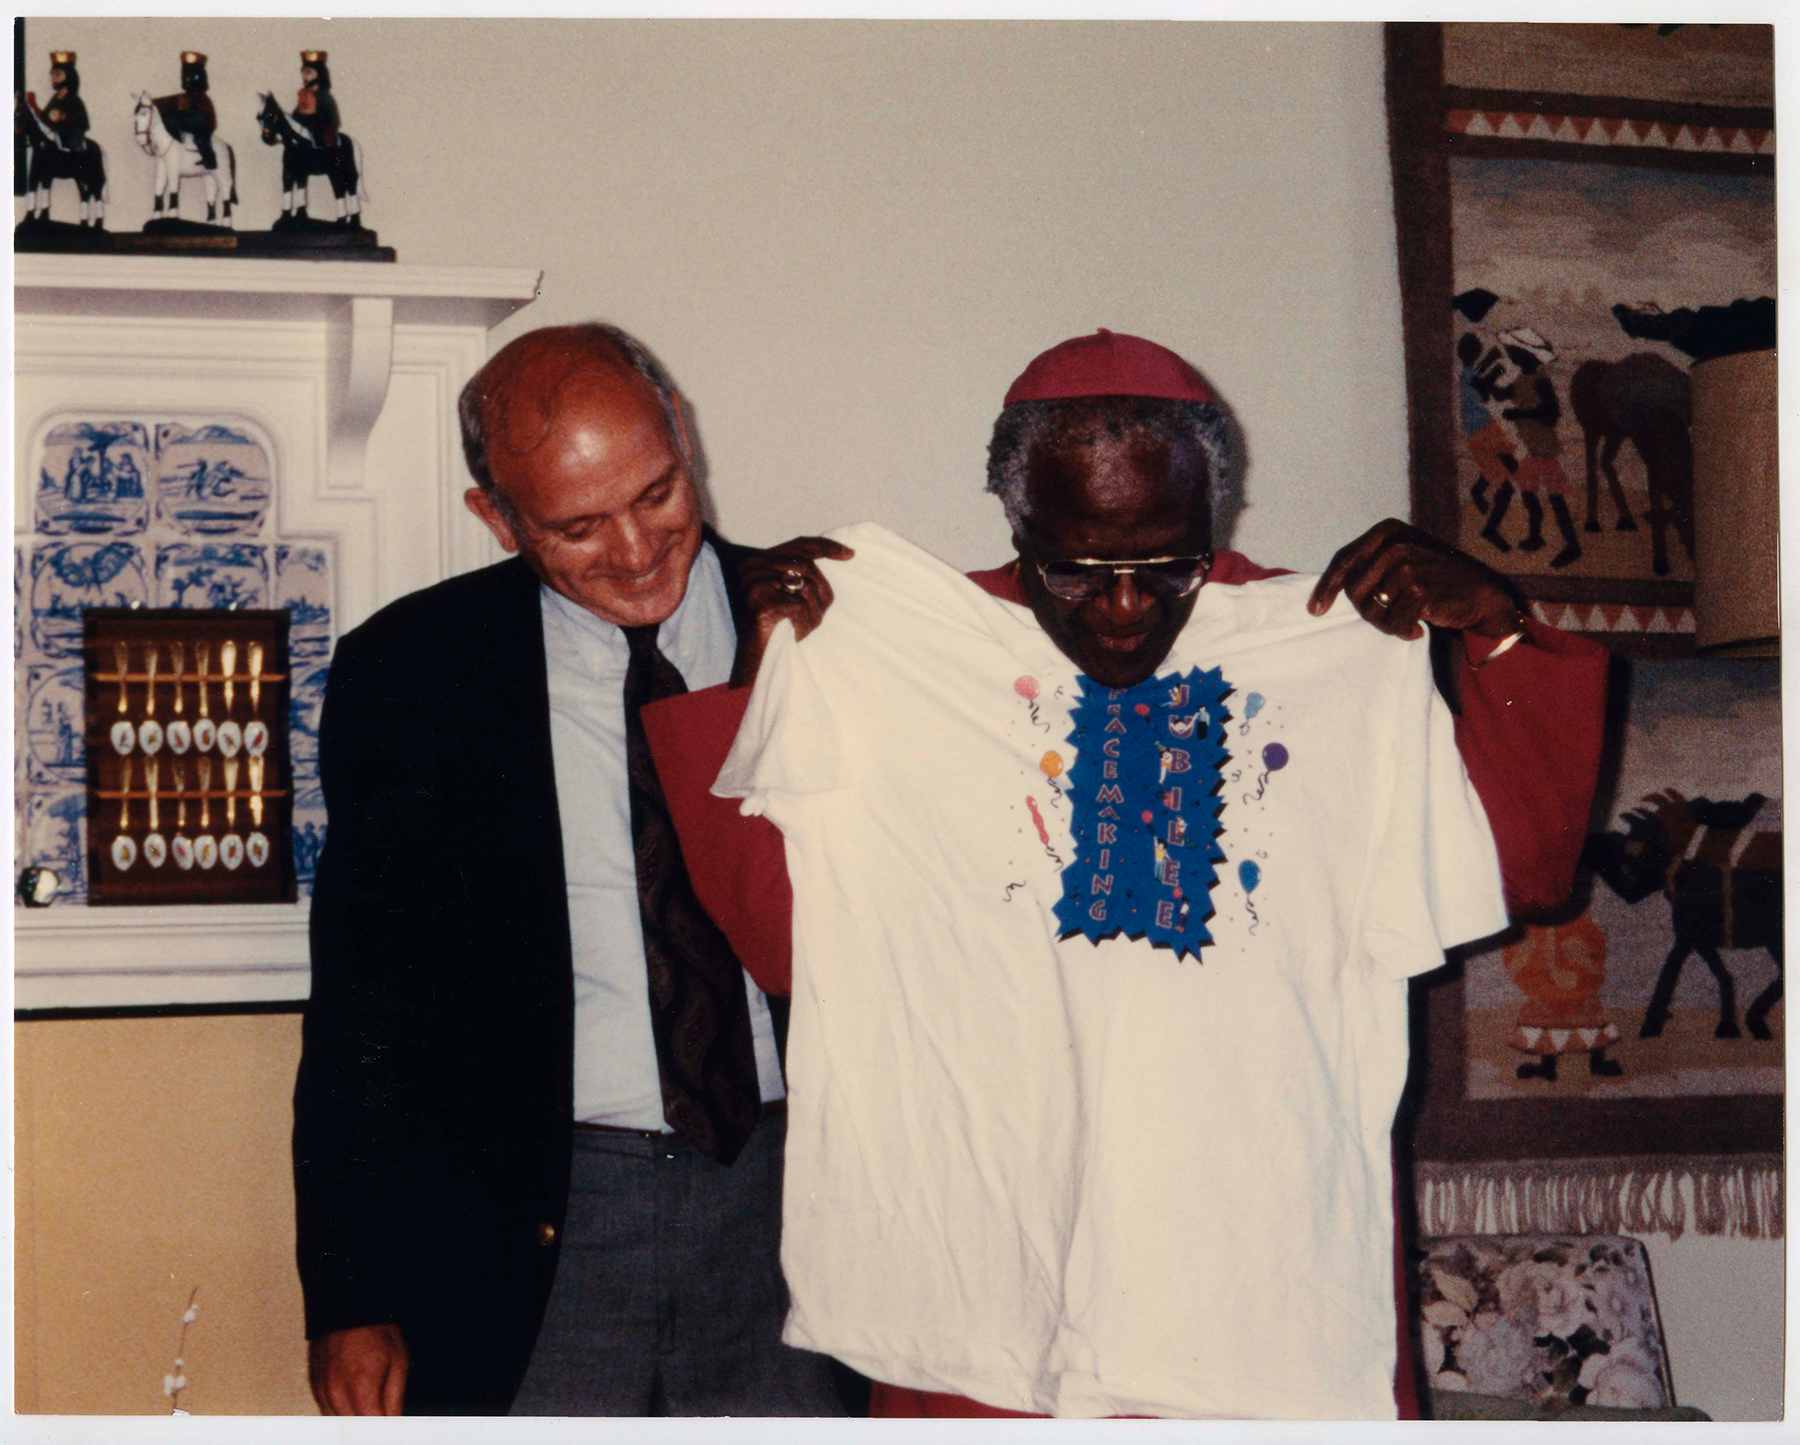 Archbishop Desmond Tutu (right) models a Peacemaking Jubilee t-shirt in his Cape Town residence. The Rev. Ken Jones (left) of Cleveland makes the presentation on behalf of 20 U.S. Presbyterian participants in the November 1994 Study/Travel Seminar to South Africa/Namibia, sponsored by PPP. From Pearl: 348265 [RG 542, Box 34, Folder 11]